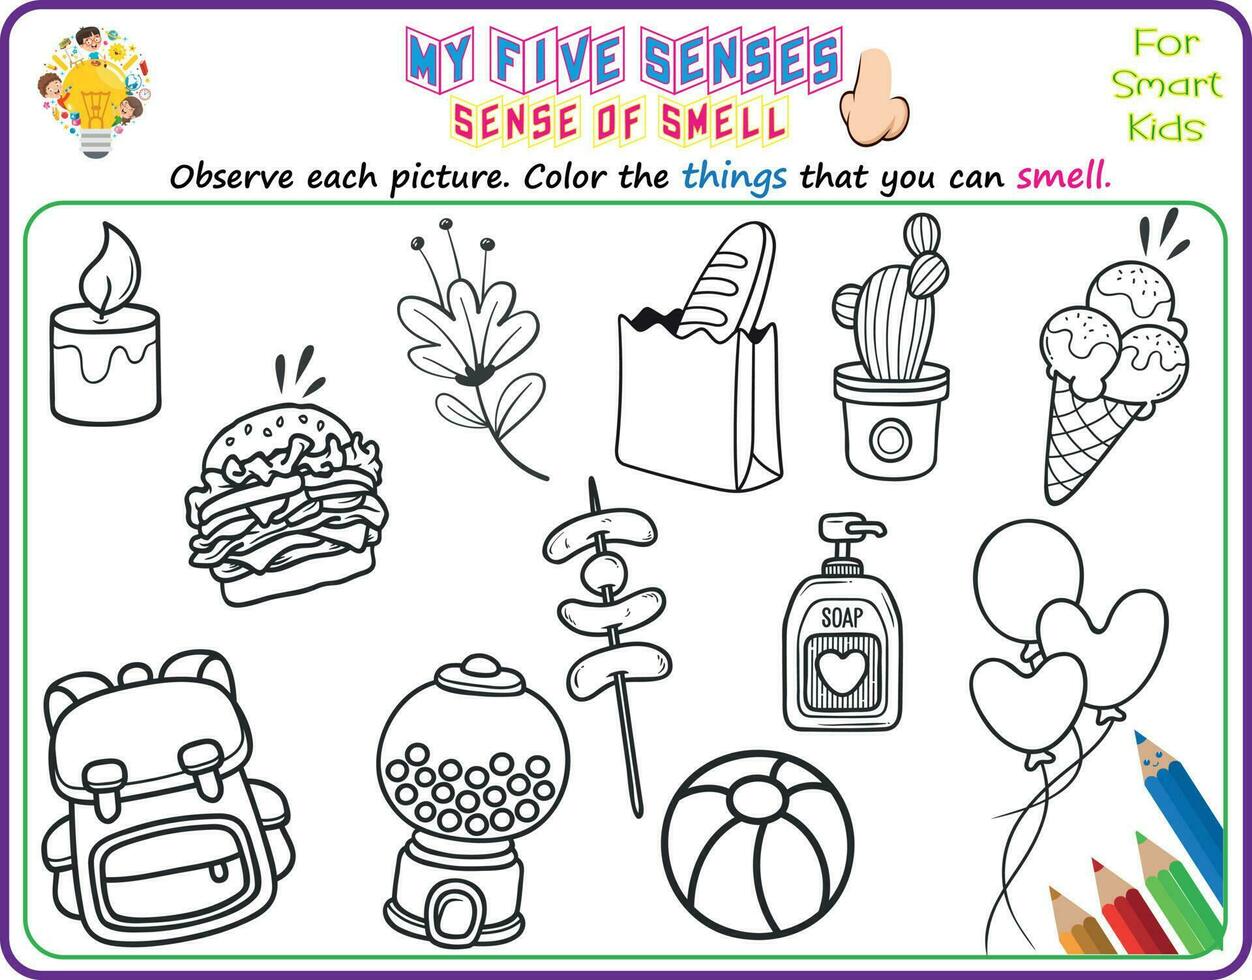 A logical printable science worksheet to help kids identify things in their environments they can smell, Color the objects that they can smell for kindergarten vector